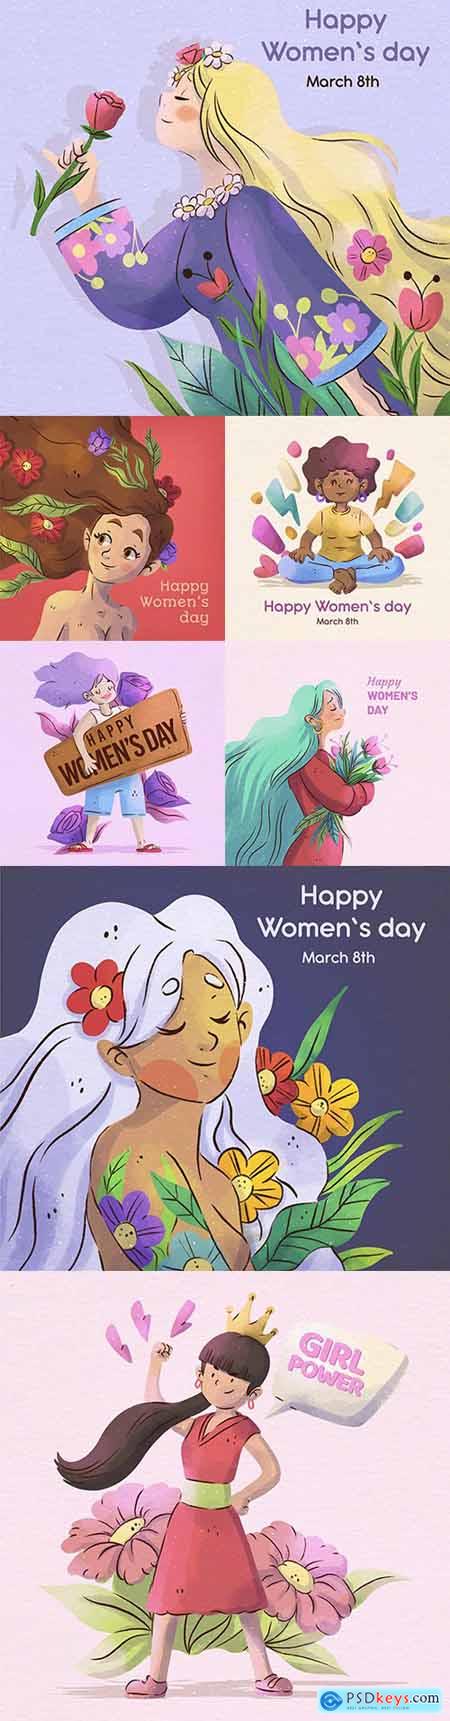 Happy Womens Day March 8 watercolor illustration